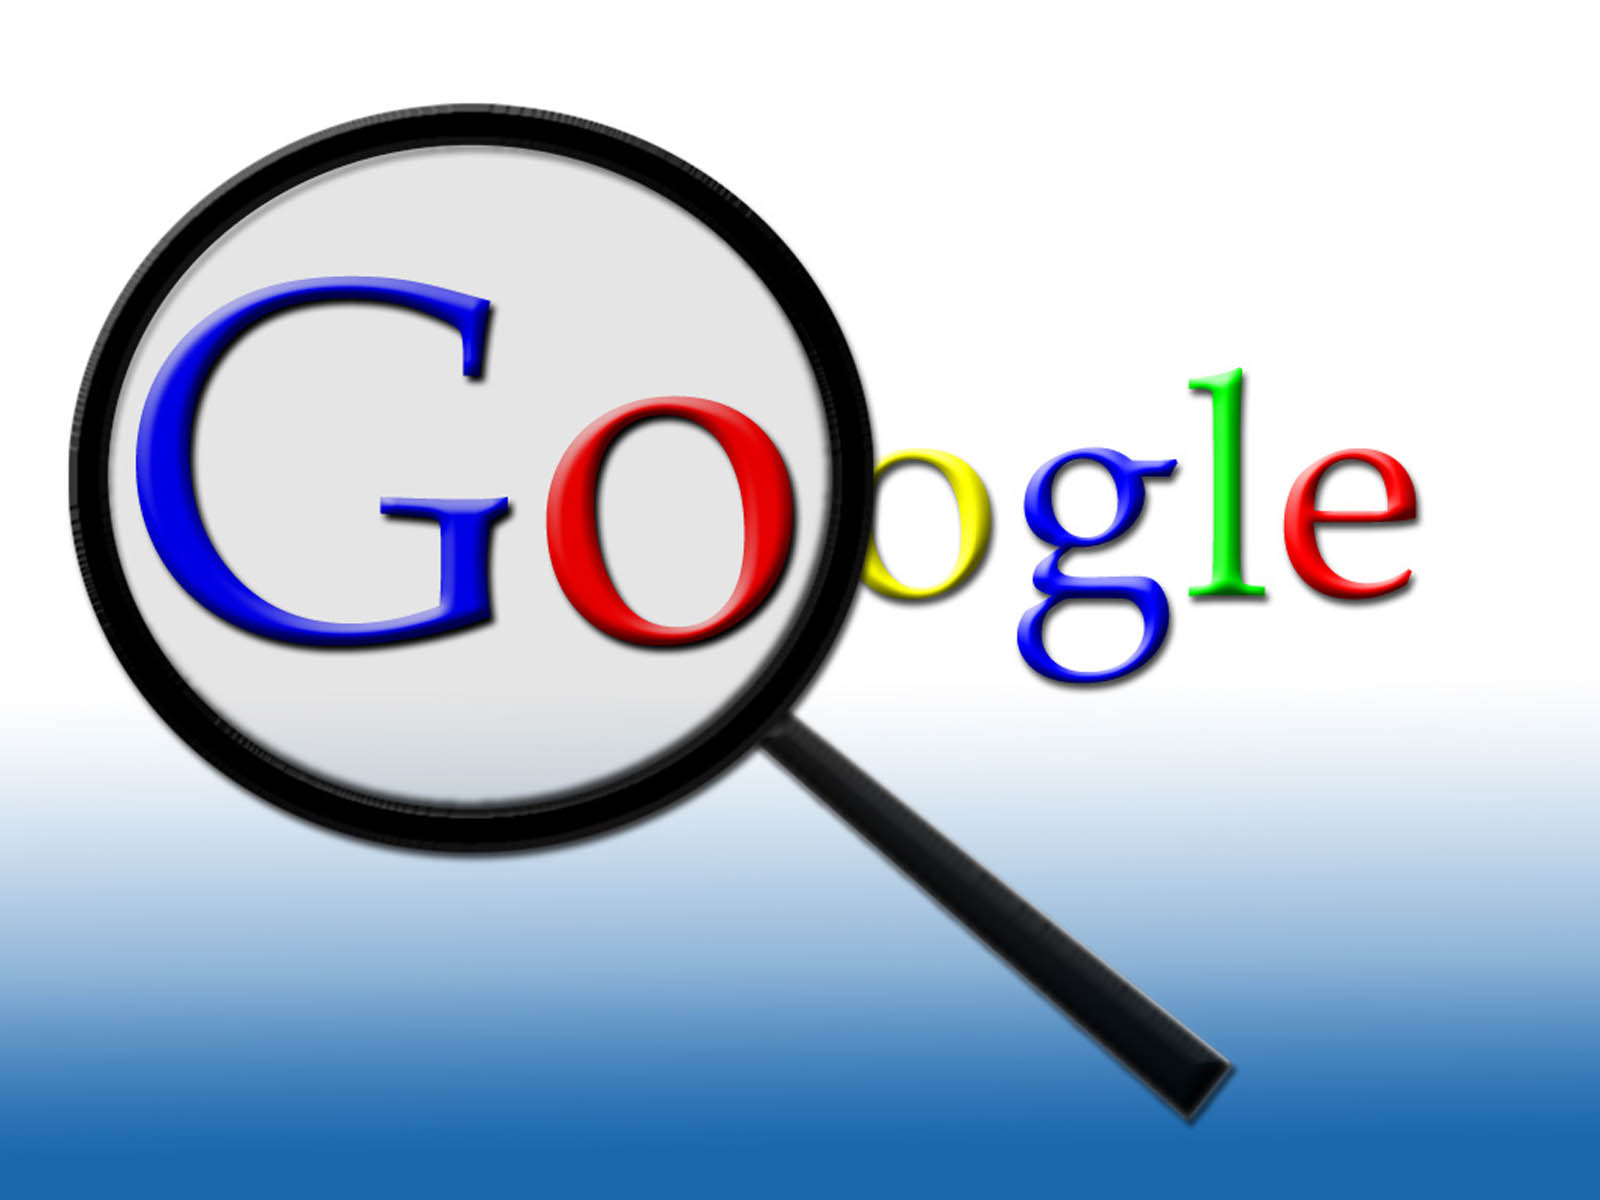 google-unveils-new-carousel-interface-for-mobile-search-results